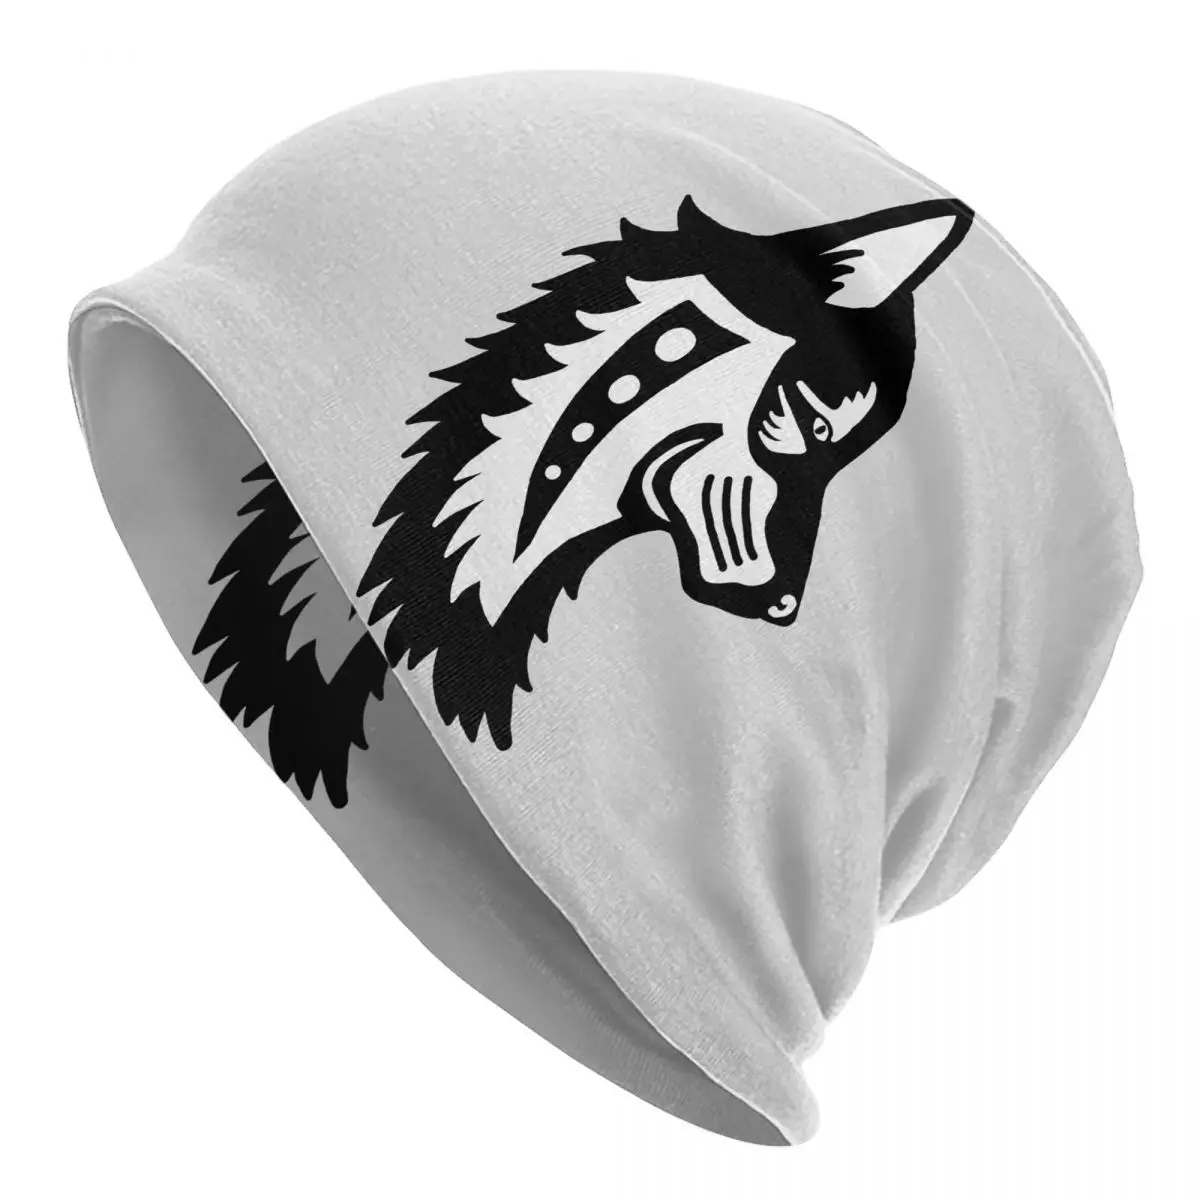 Native Wolf Adult Men's Women's Knit Hat Keep warm winter knitted hat